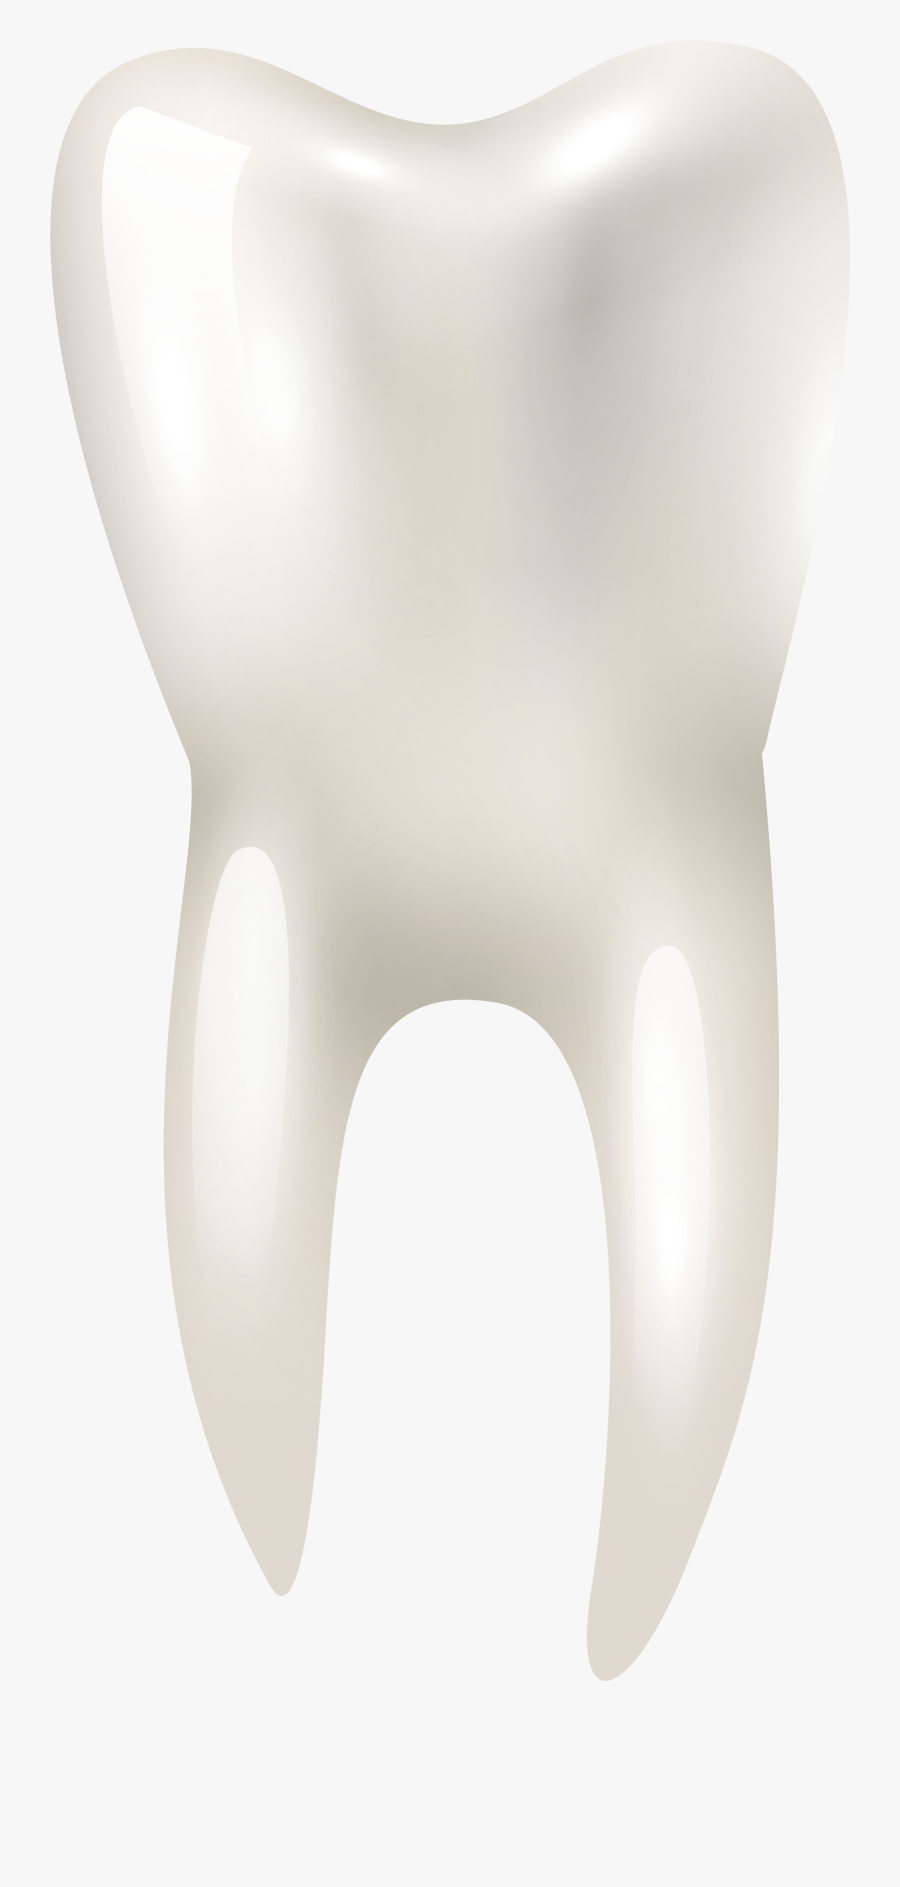 Tooth Png Clip Art - Chair, Transparent Clipart